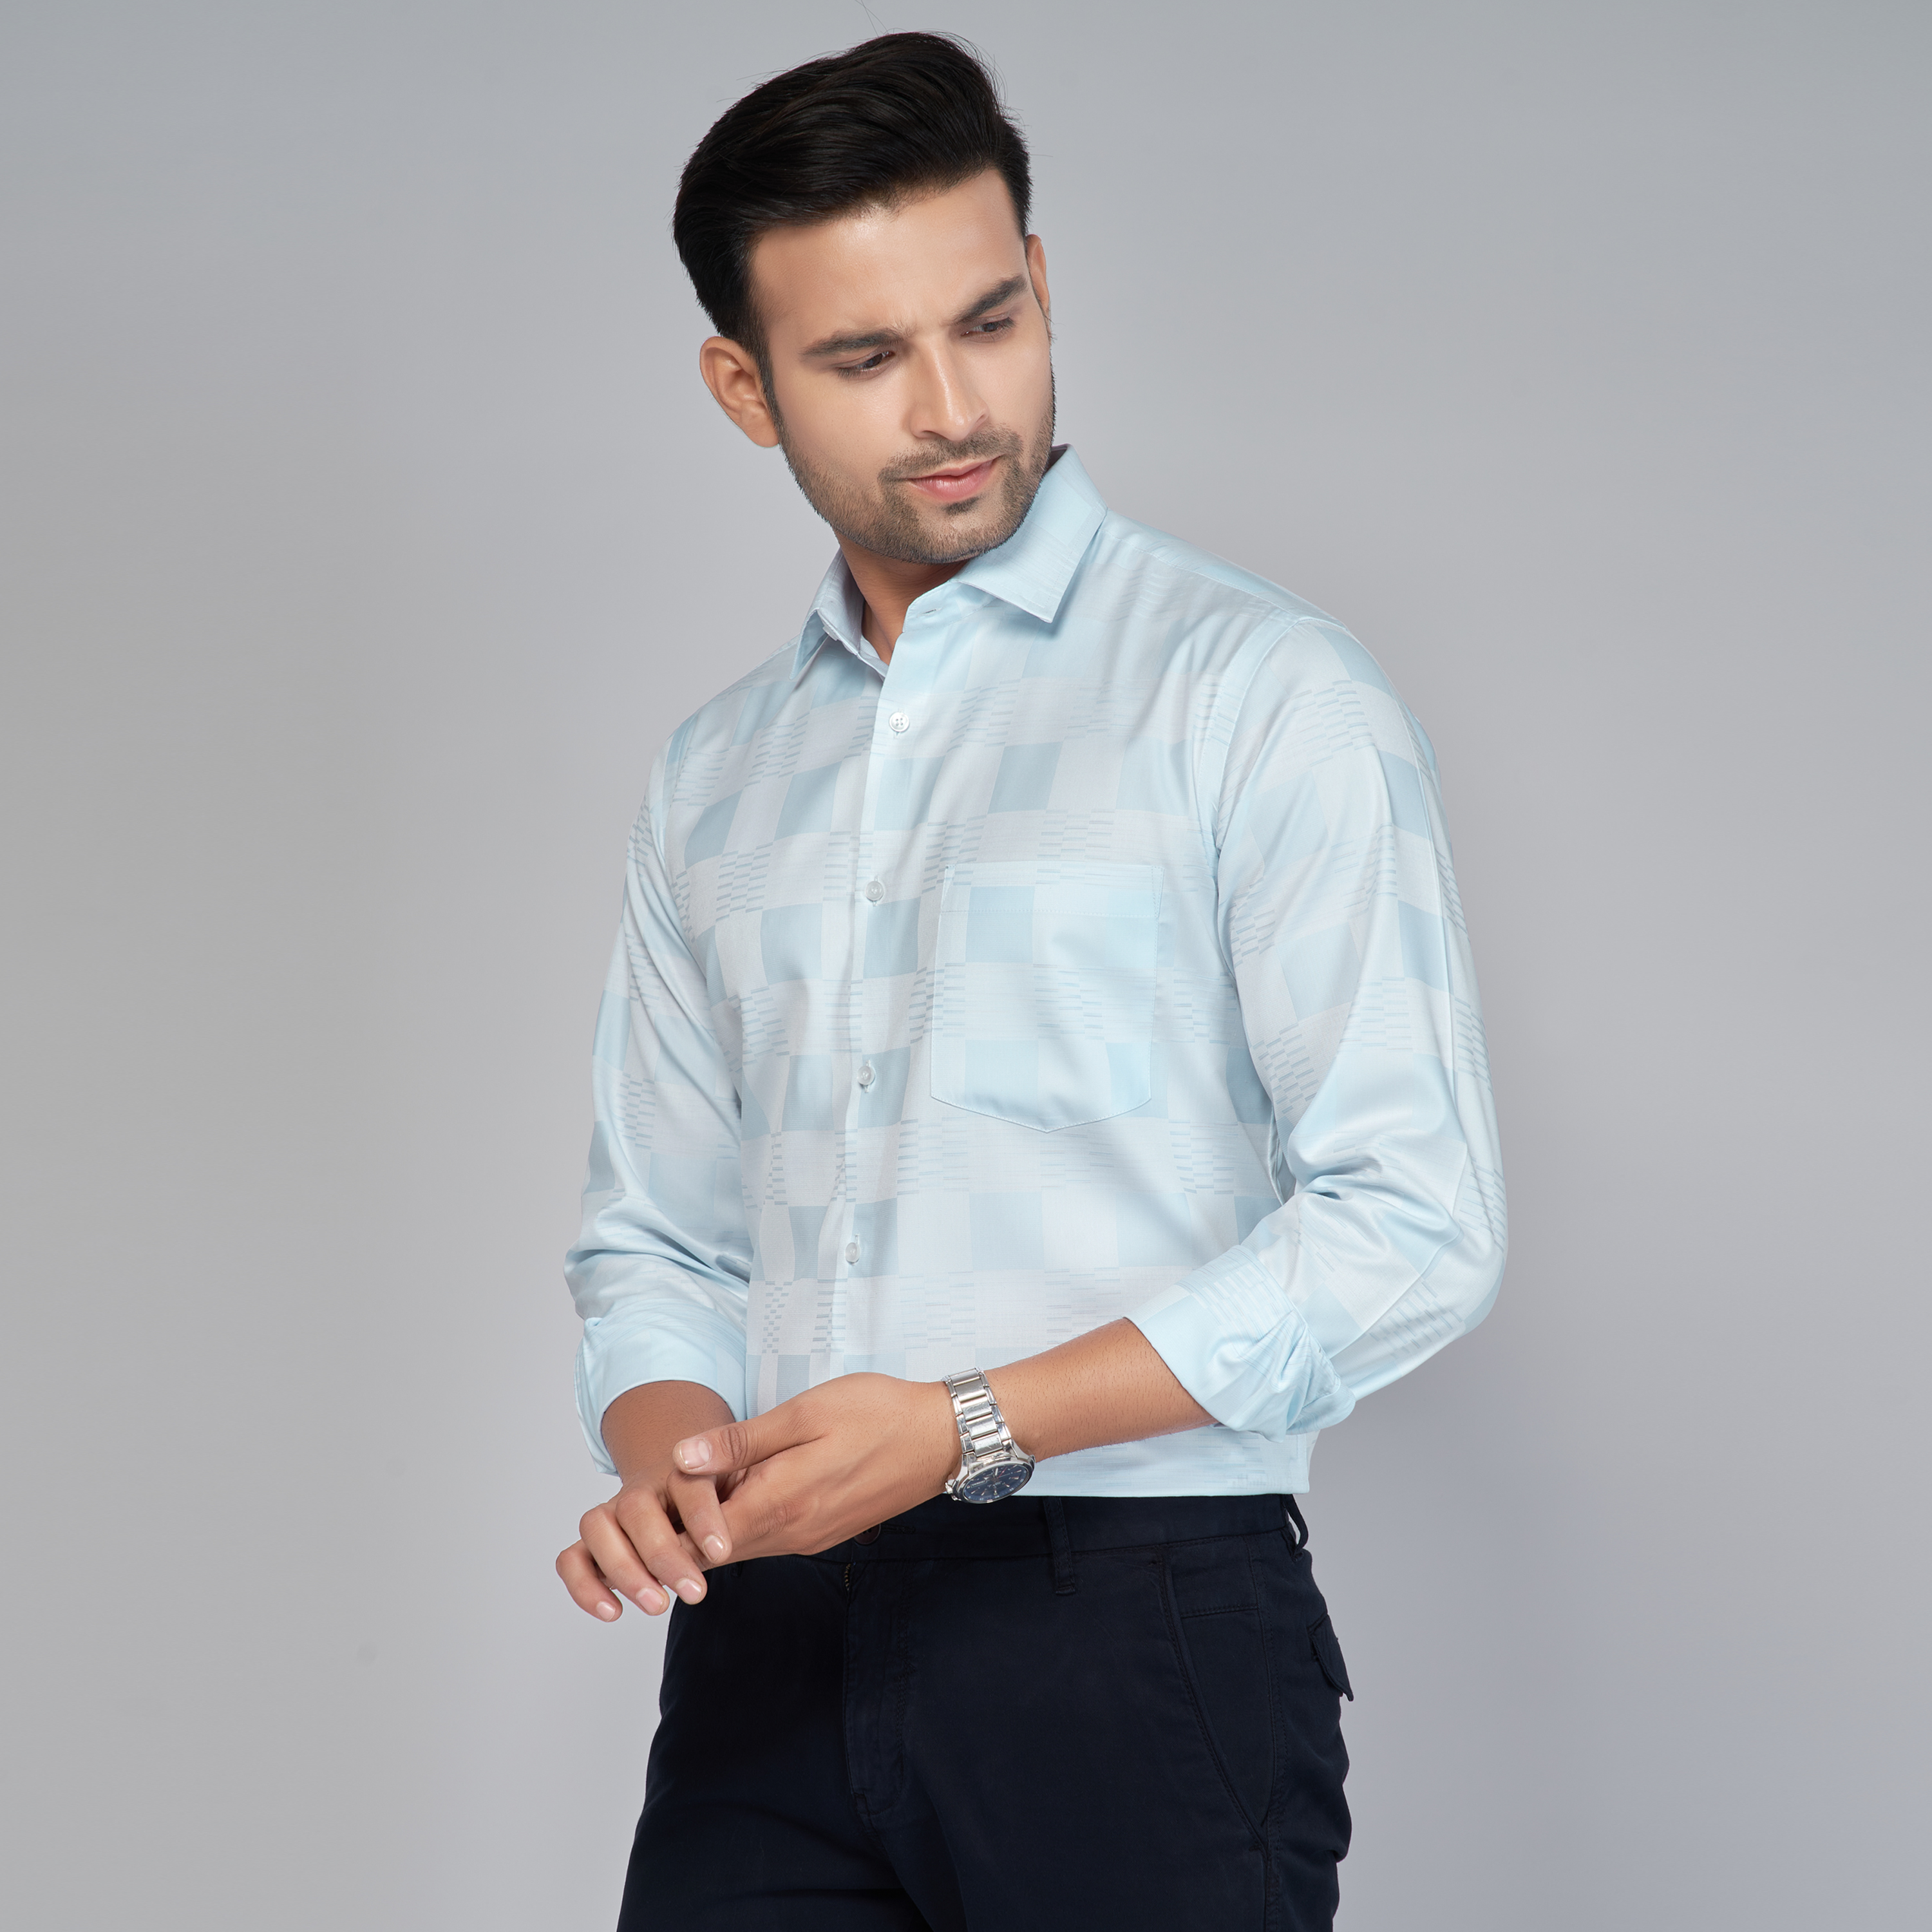  Shirts for Professional Men